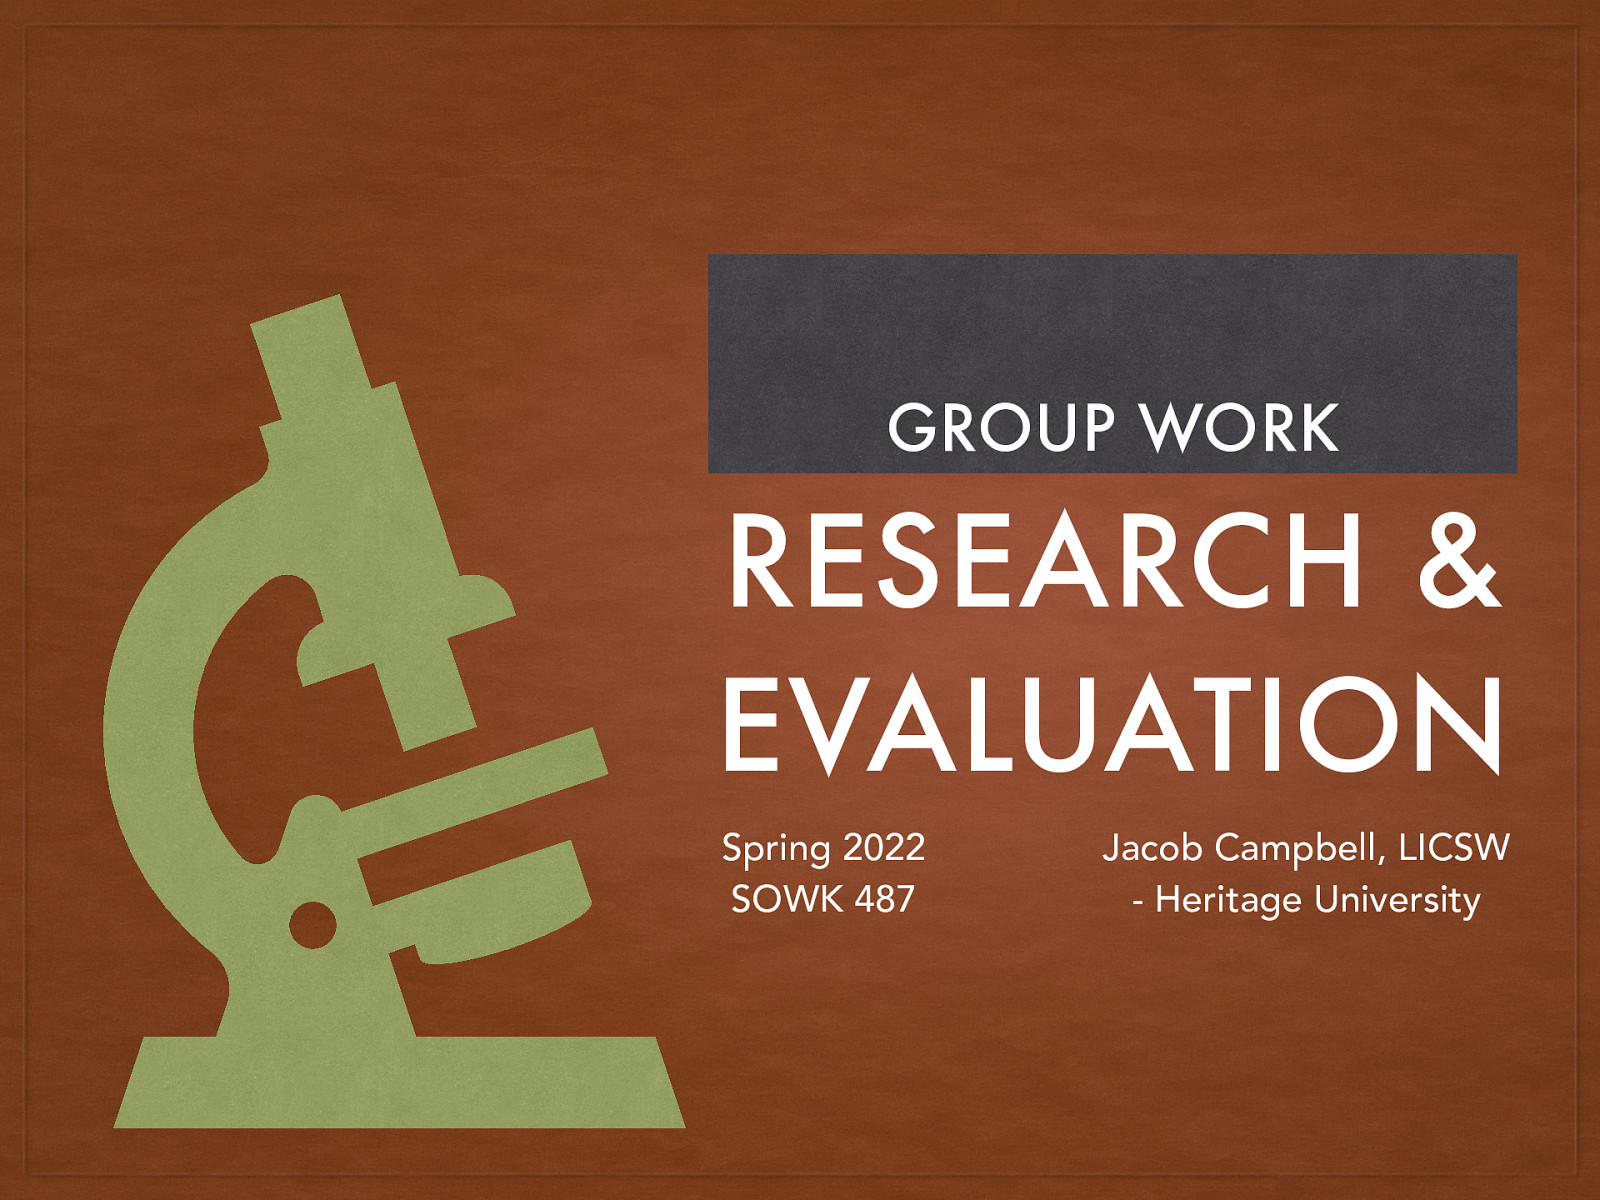 Spring 2022 SOWK 487 Week 16 - Group Work Research and Evaluation